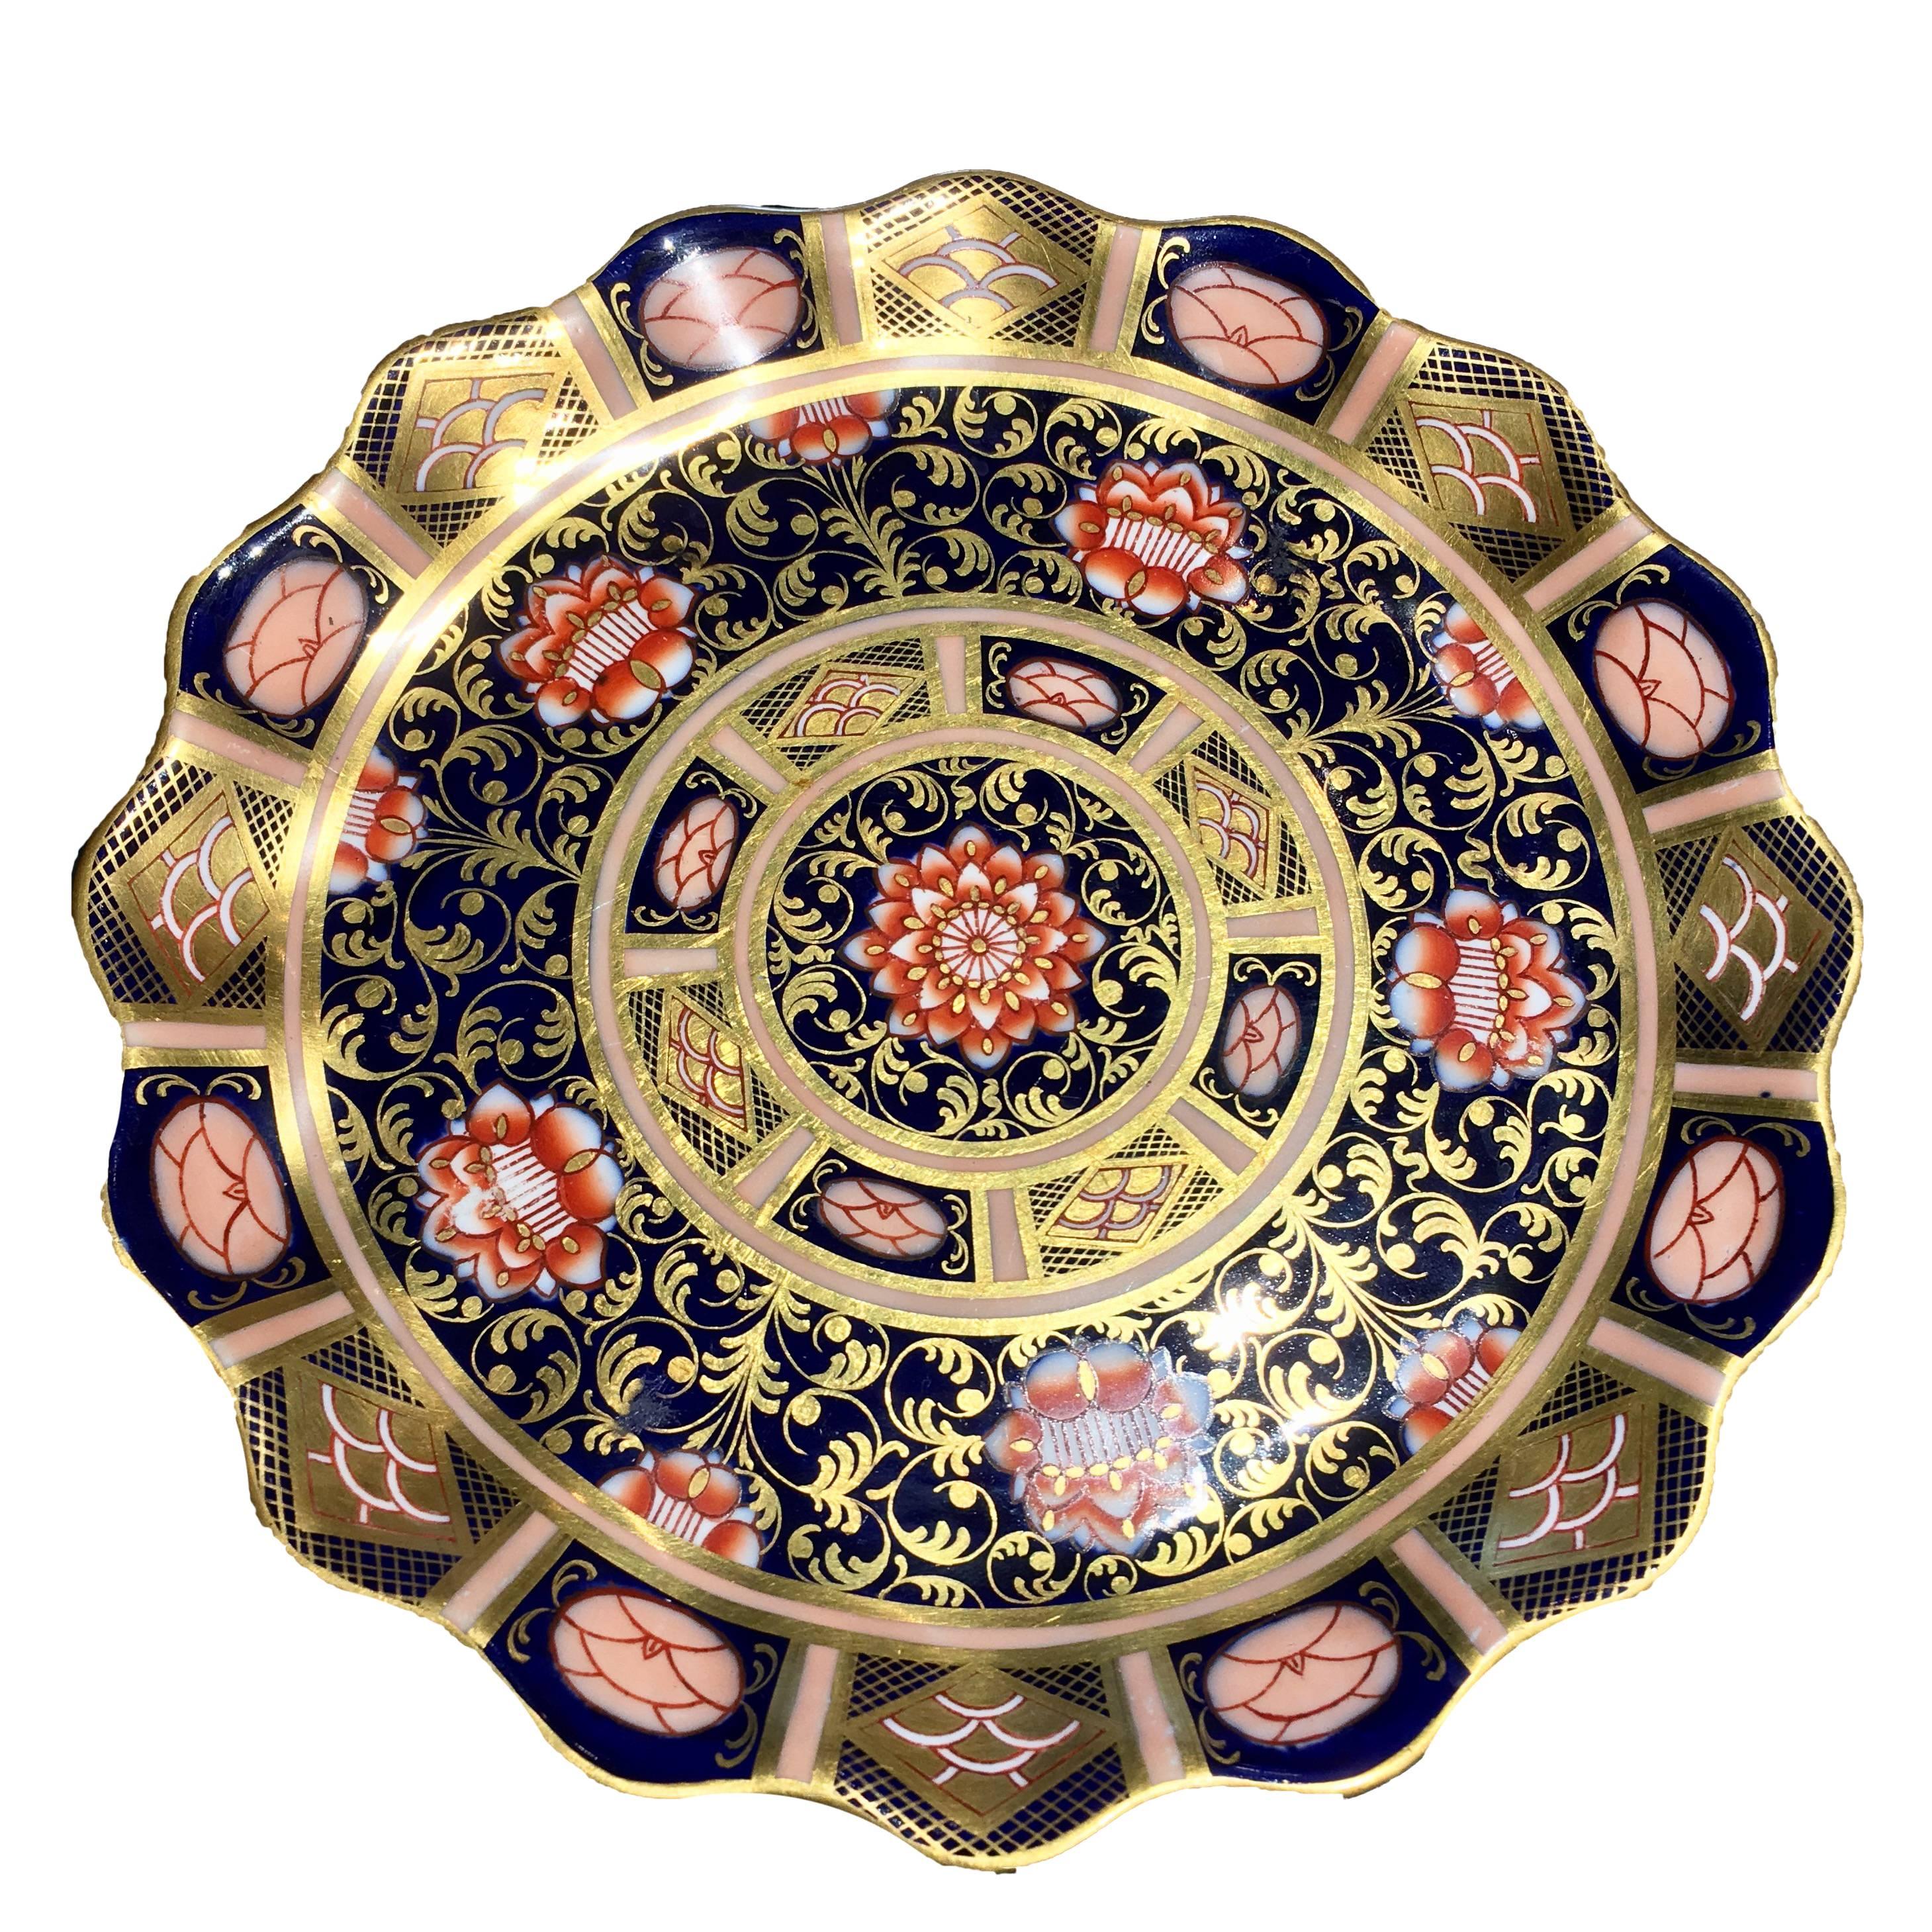 Hand-painted in rich gold, dark blue and a reddish orange, the exotic Imari pattern with its oriental air has always been one of Wedgwood's most sought after designs.

Stylish, elegant and in perfect antique condition. Highly collectable.

Each